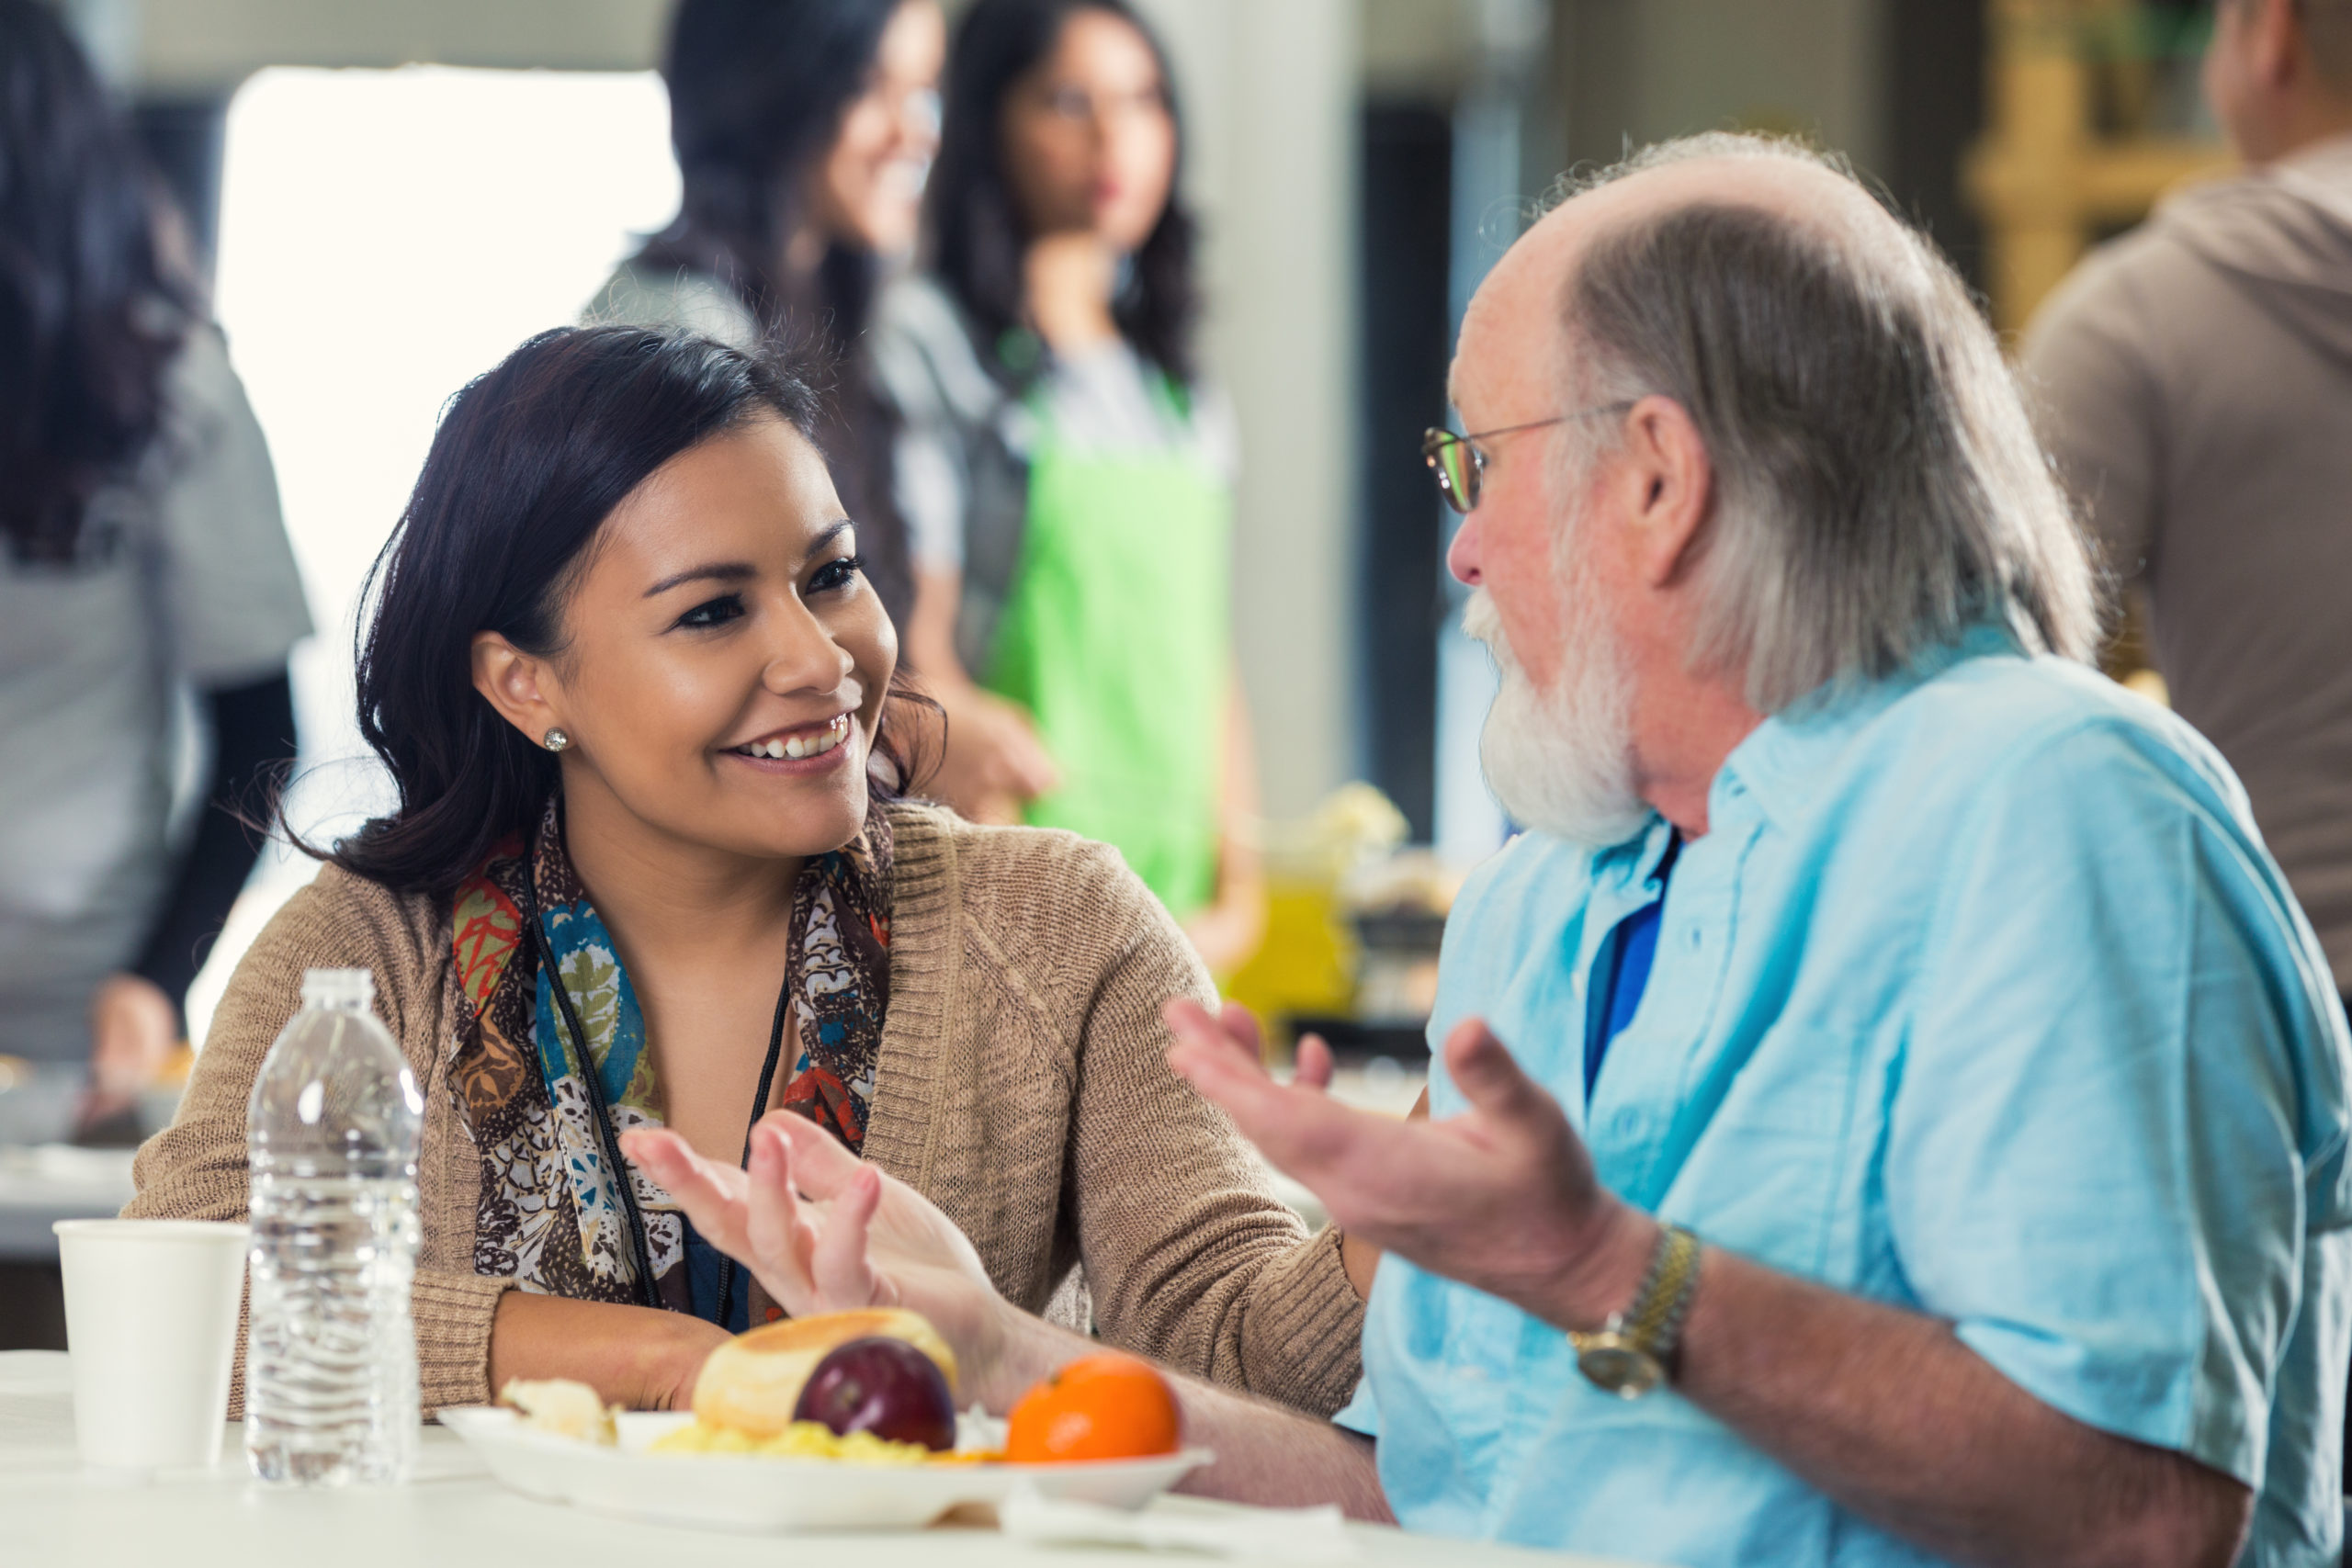 Young adult Hispanic woman is sitting at table in soup kitchen and talking with senior Caucasian man. Man has grey hair and beard. They are discussing something while senior enjoys healthy meal. Volunteers are serving food in background.